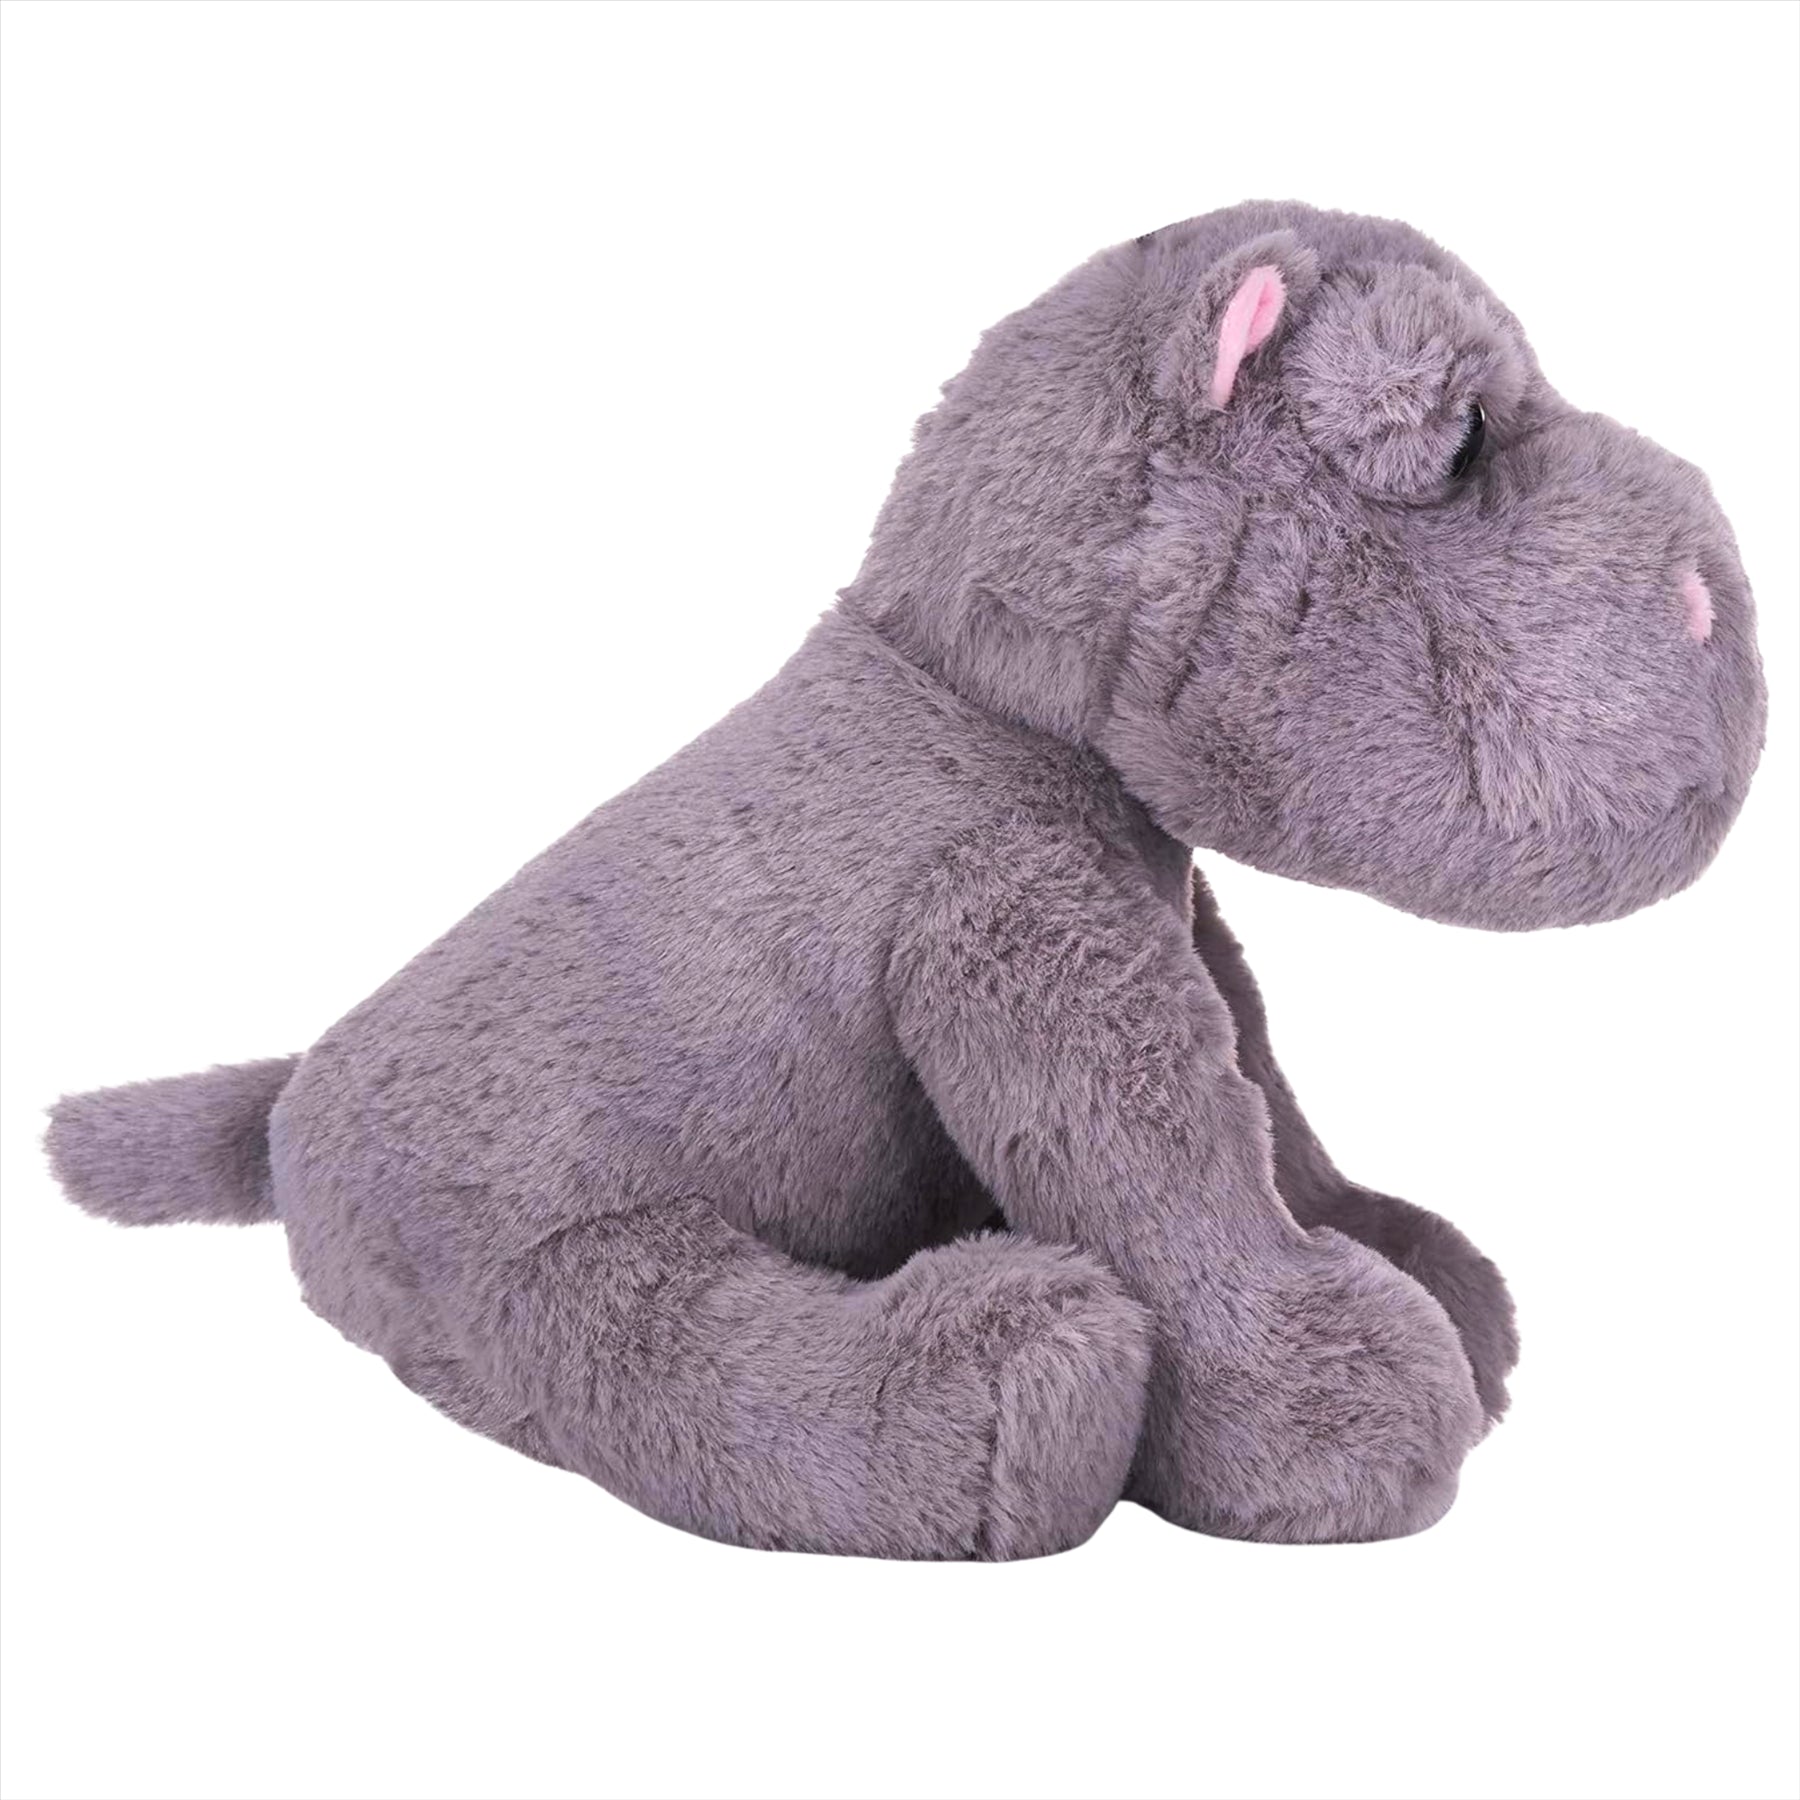 Posh Paws Out of Africa Animals Collection Hippo Super Soft Plush Toy 30cm 12"